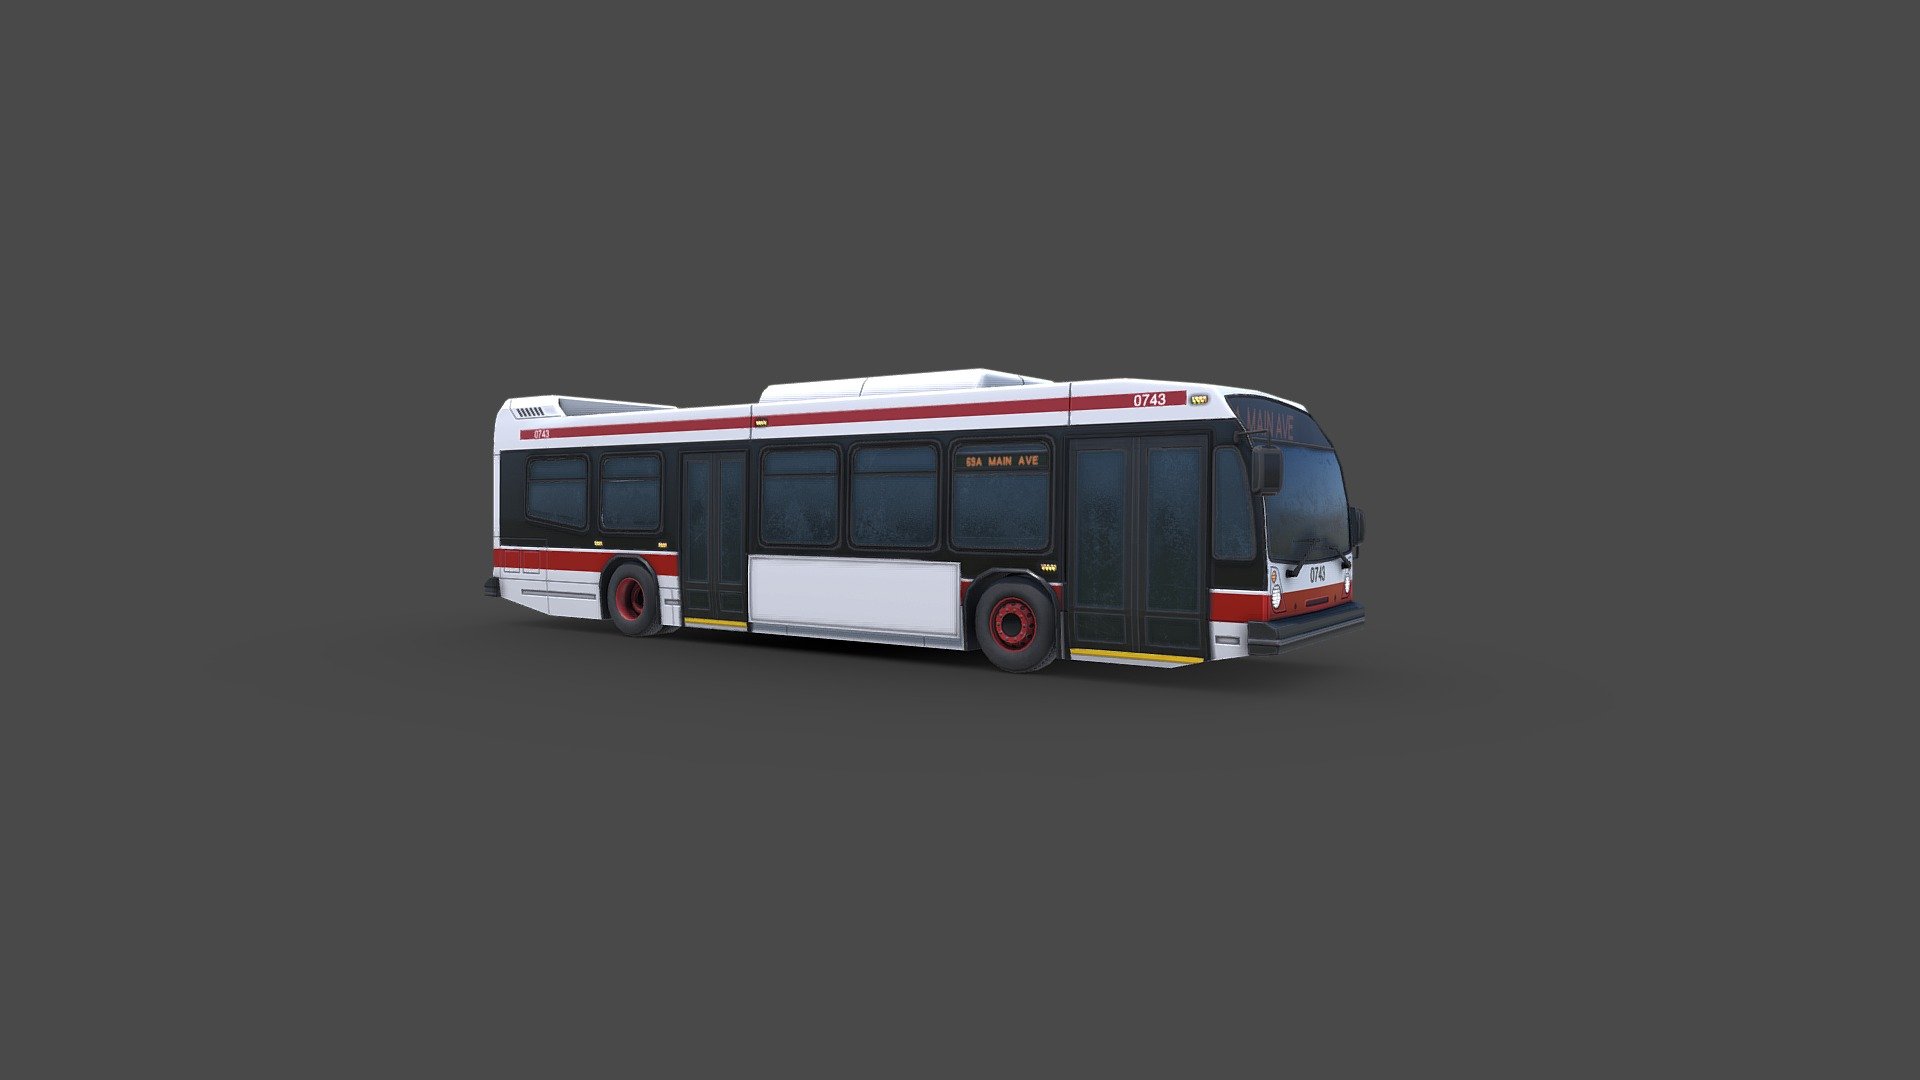 NovaBus LFS transit bus with base livery similar to the TTC. (Toronto Transit Commision)

Includes:

PSDs for each material (customize bus stripe, base color, hubcaps, route info)

Geo in .obj format



*Pre-made livery color options: 

* Red stripe

* Yellow stripe

* Blue stripe

* Black stripe

* Blue w. white stripe

* Red w. white stripe

* Stock white - NovaBus LFS Transit Bus - Buy Royalty Free 3D model by Evan Hiltz (@evan.hiltz) 3d model